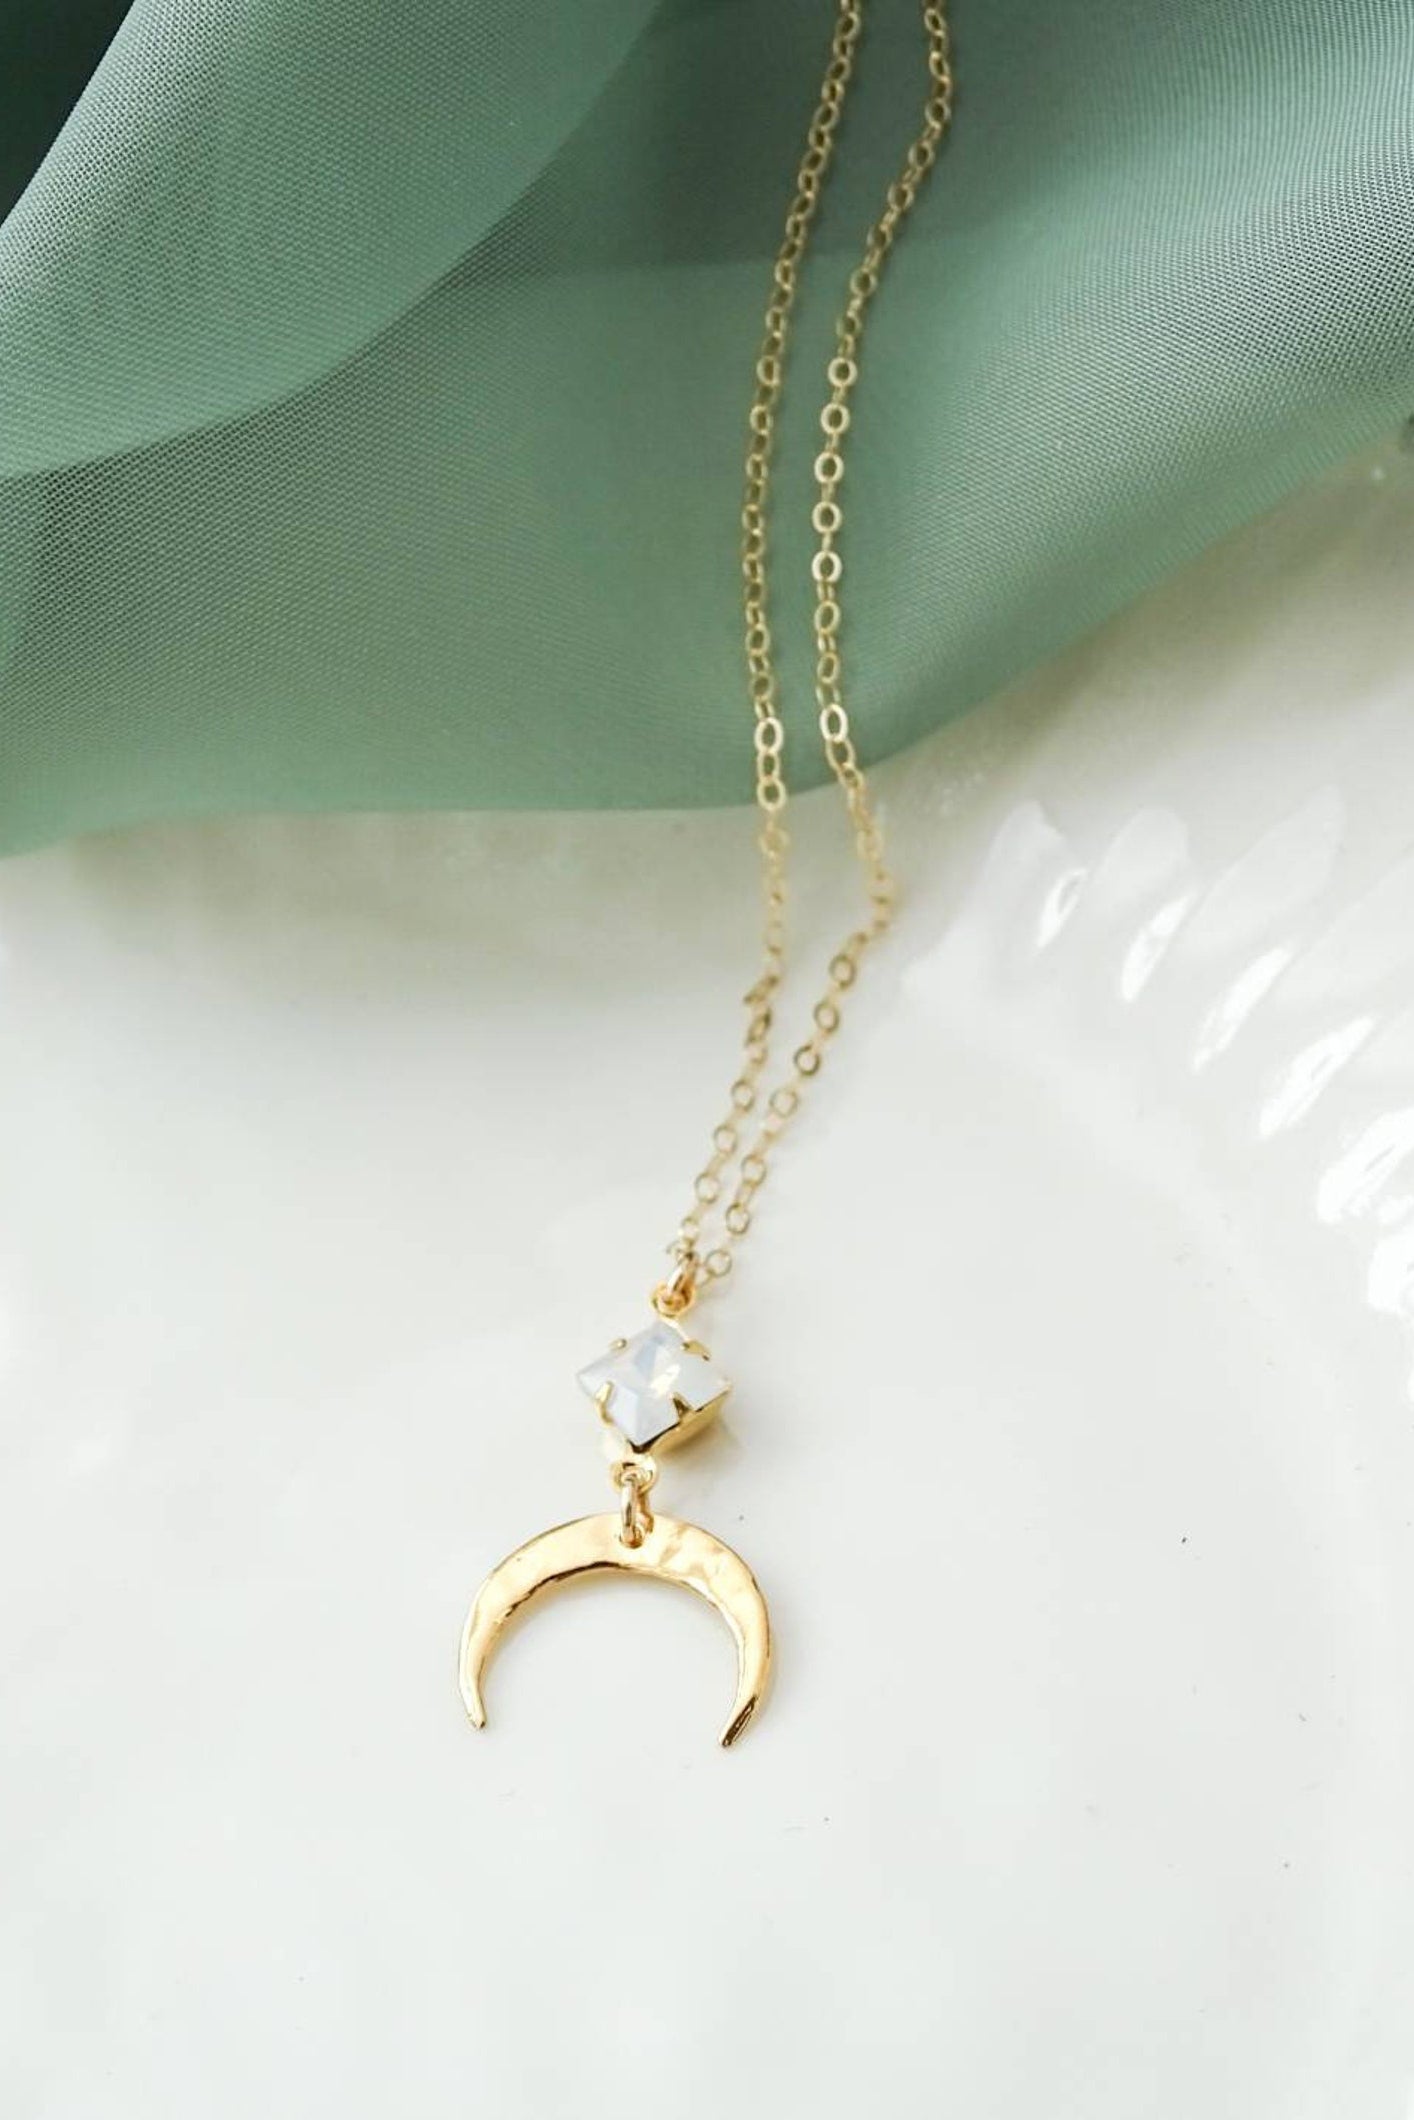 Glow In The Dark Crescent Moon Necklace at Rs 89 | फैशन नेकलेस in Delhi |  ID: 21535511673